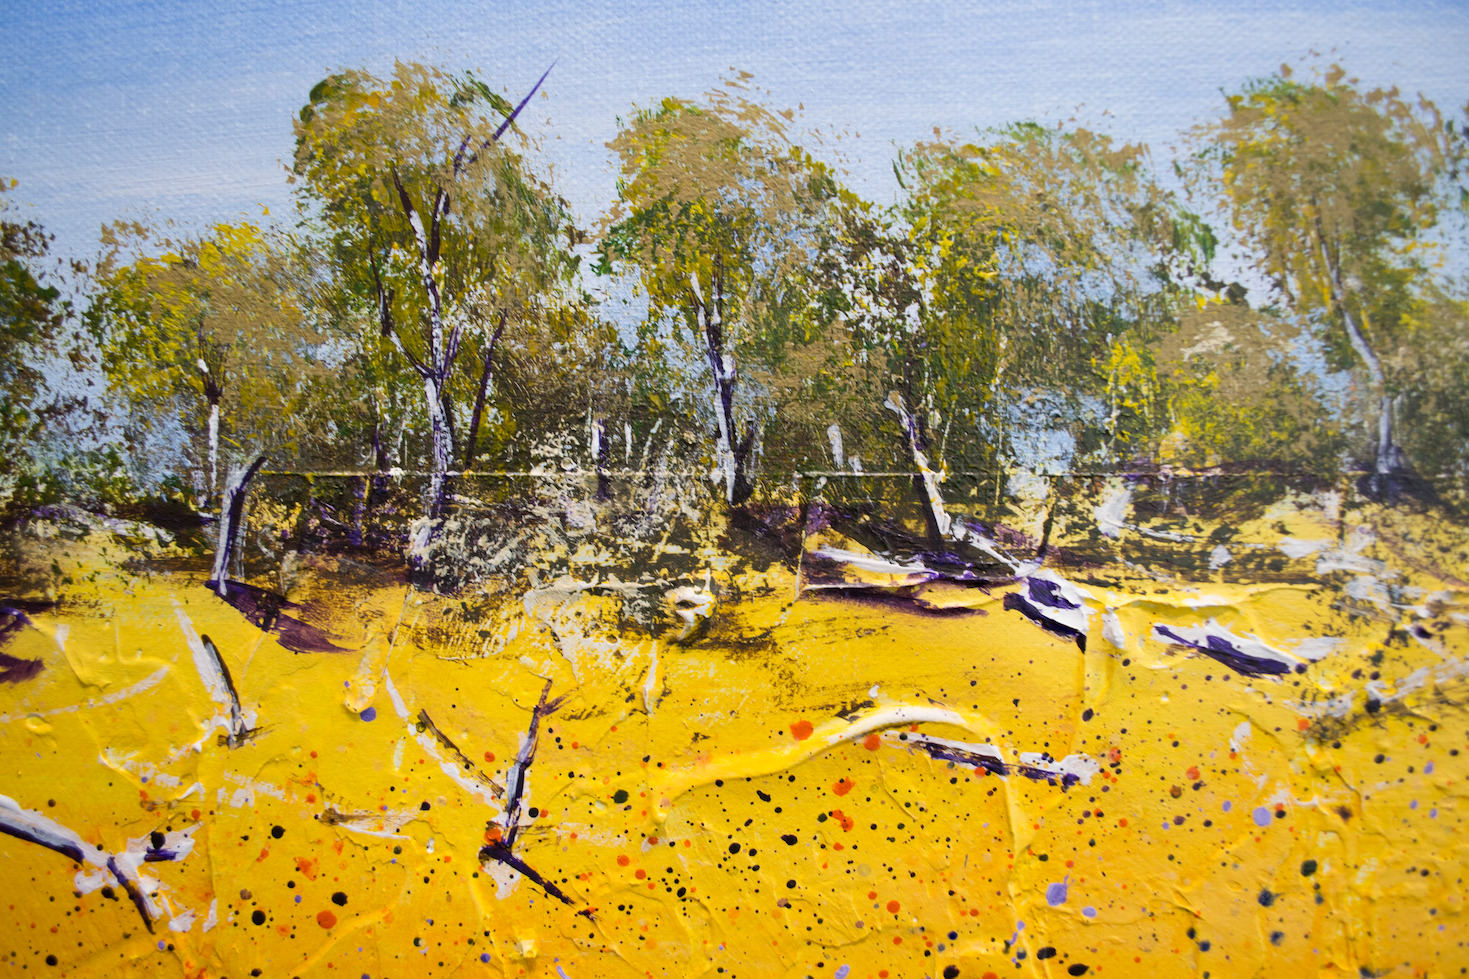 Close Up Detail 2 Of Acrylic Painting "Edge of The Simpson Desert" By Louis Dalozzo